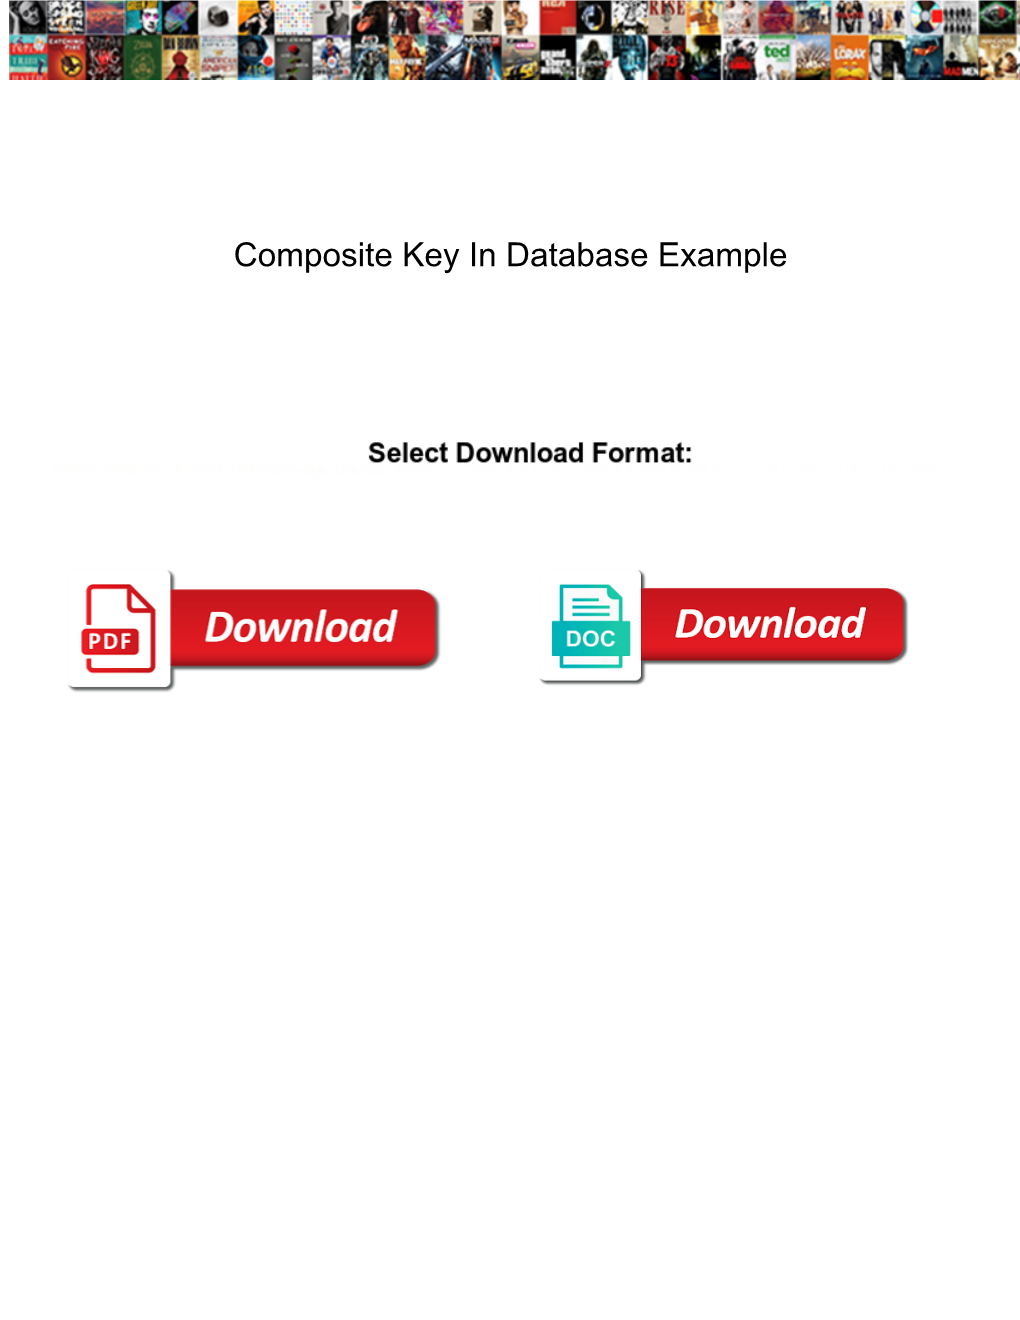 Composite Key in Database Example